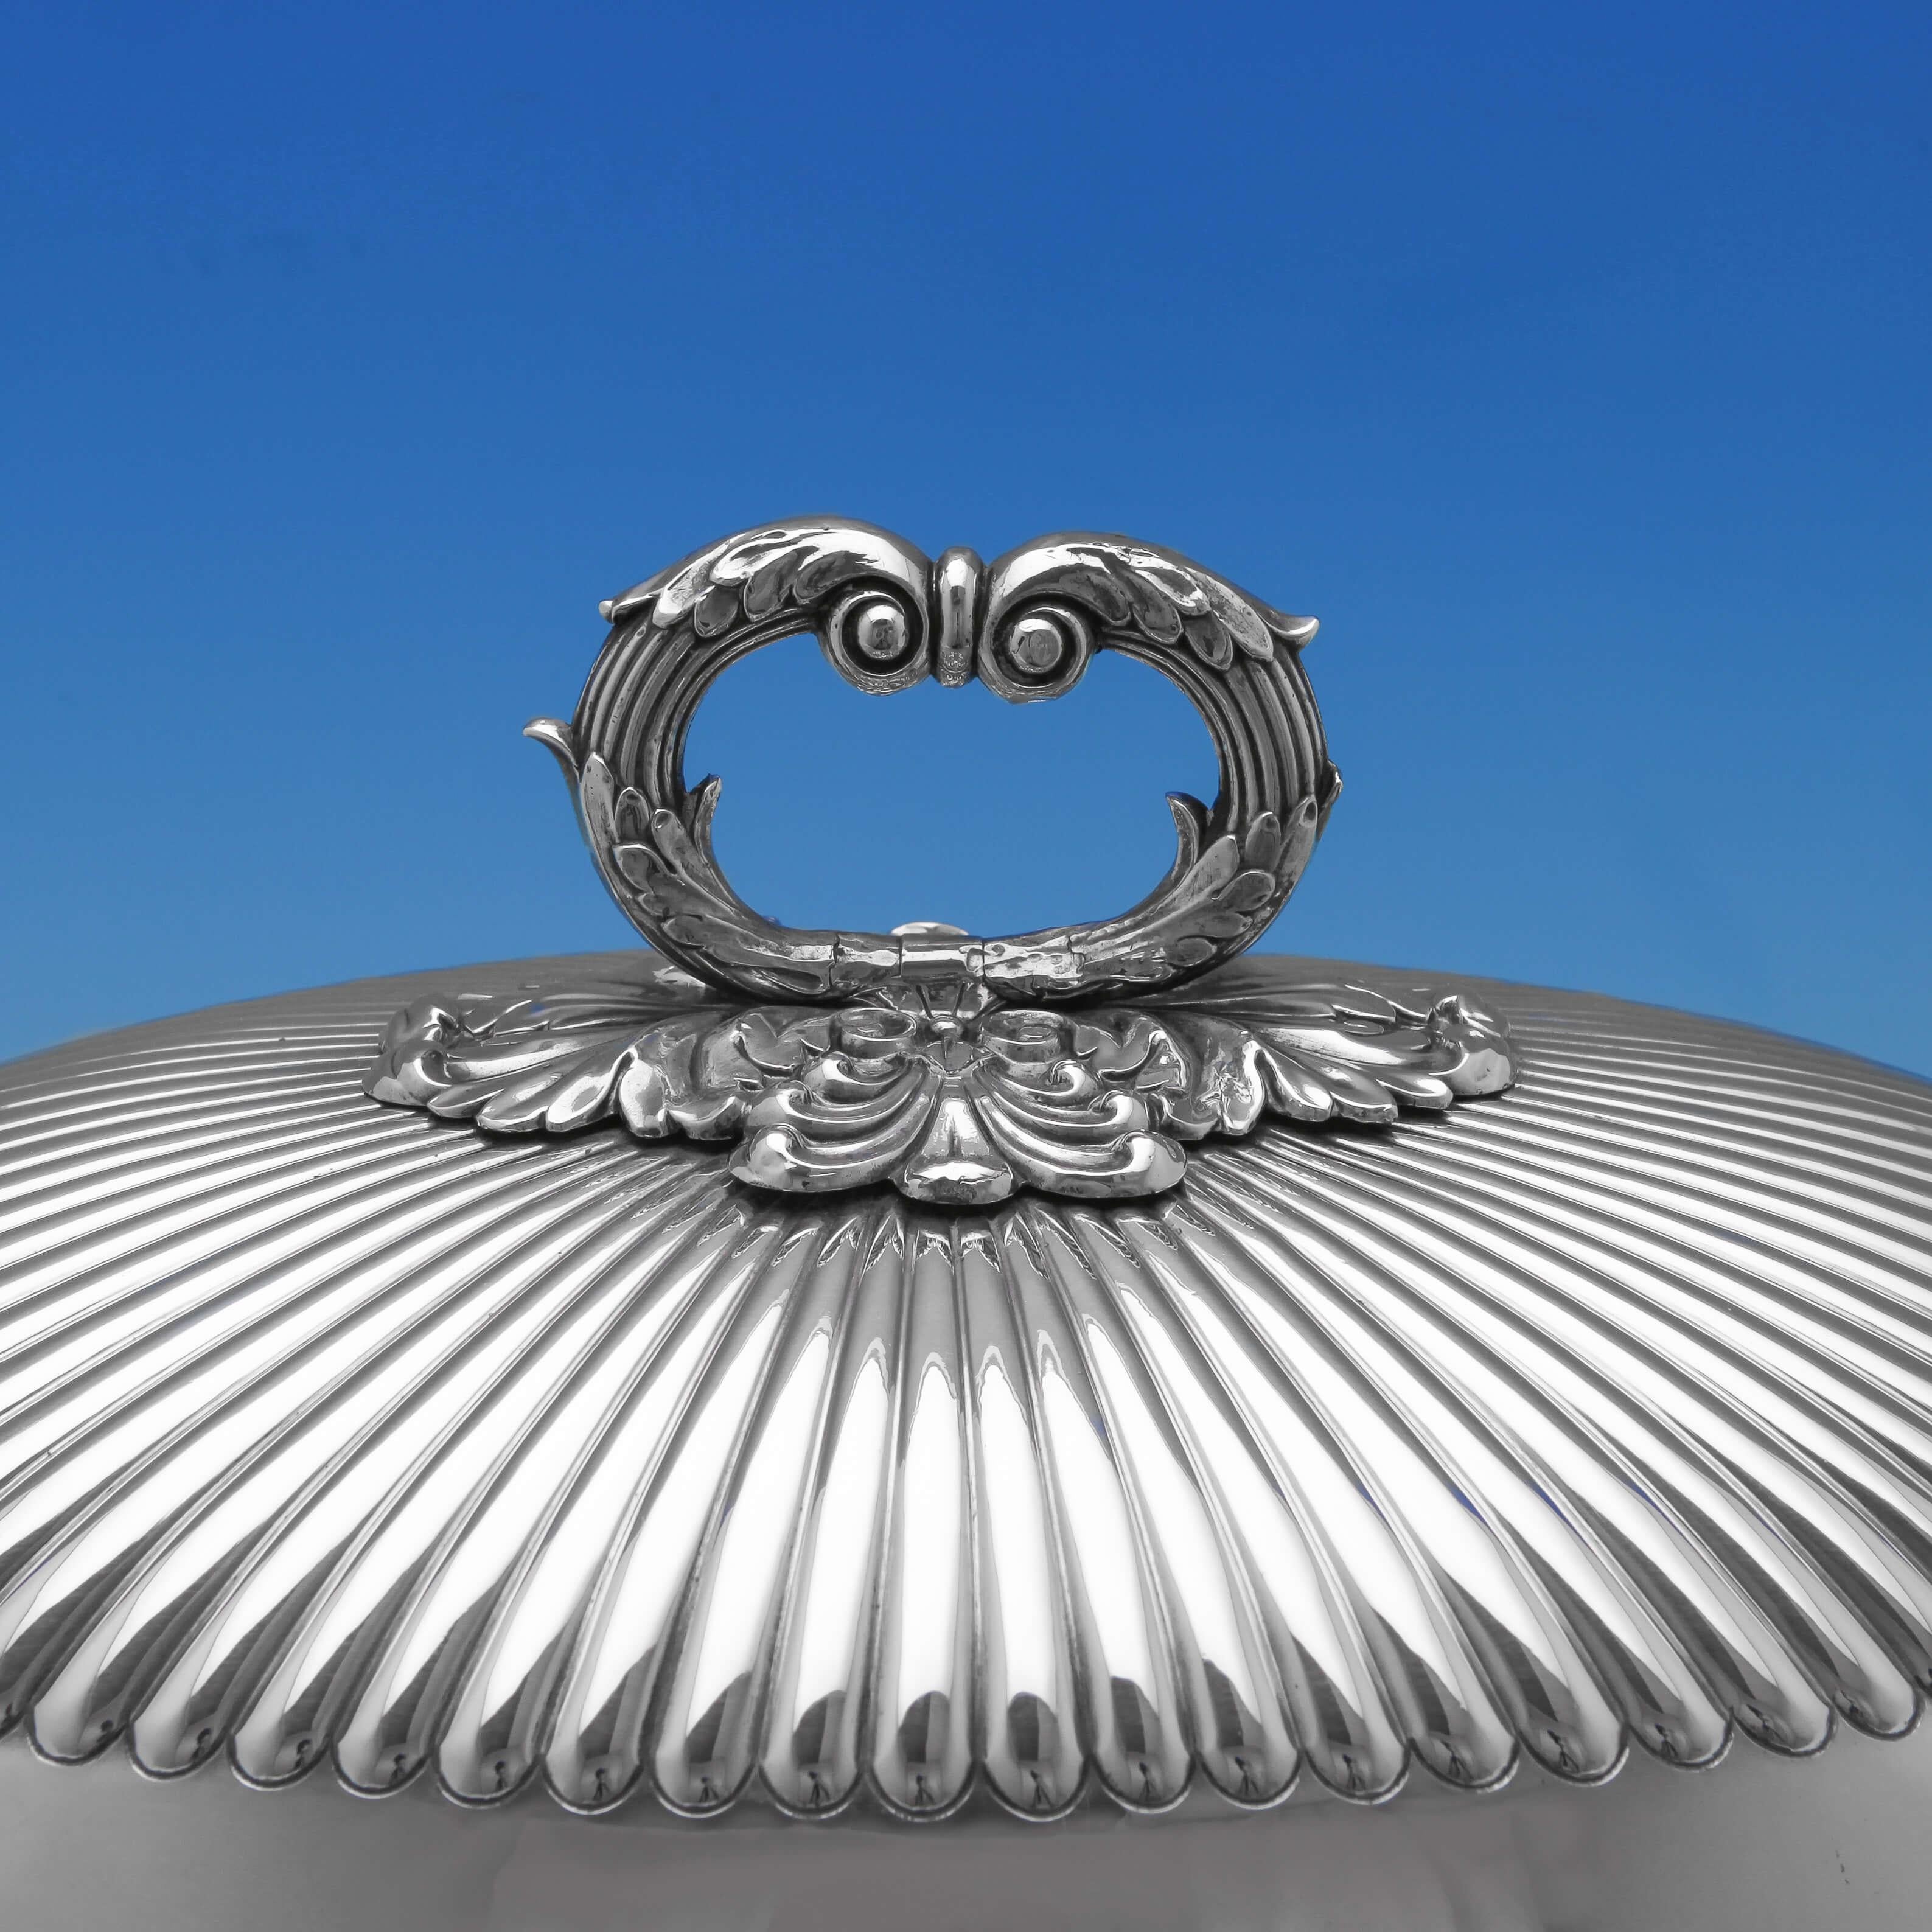 Made circa 1830 by Matthew Boulton, this wonderful, William IV, Antique, Old Sheffield plated meat dish and cover, exemplifies fine craftsmanship, standing on lion paw feet and featuring shell and gadroon borders, acanthus scroll handles, fluting to